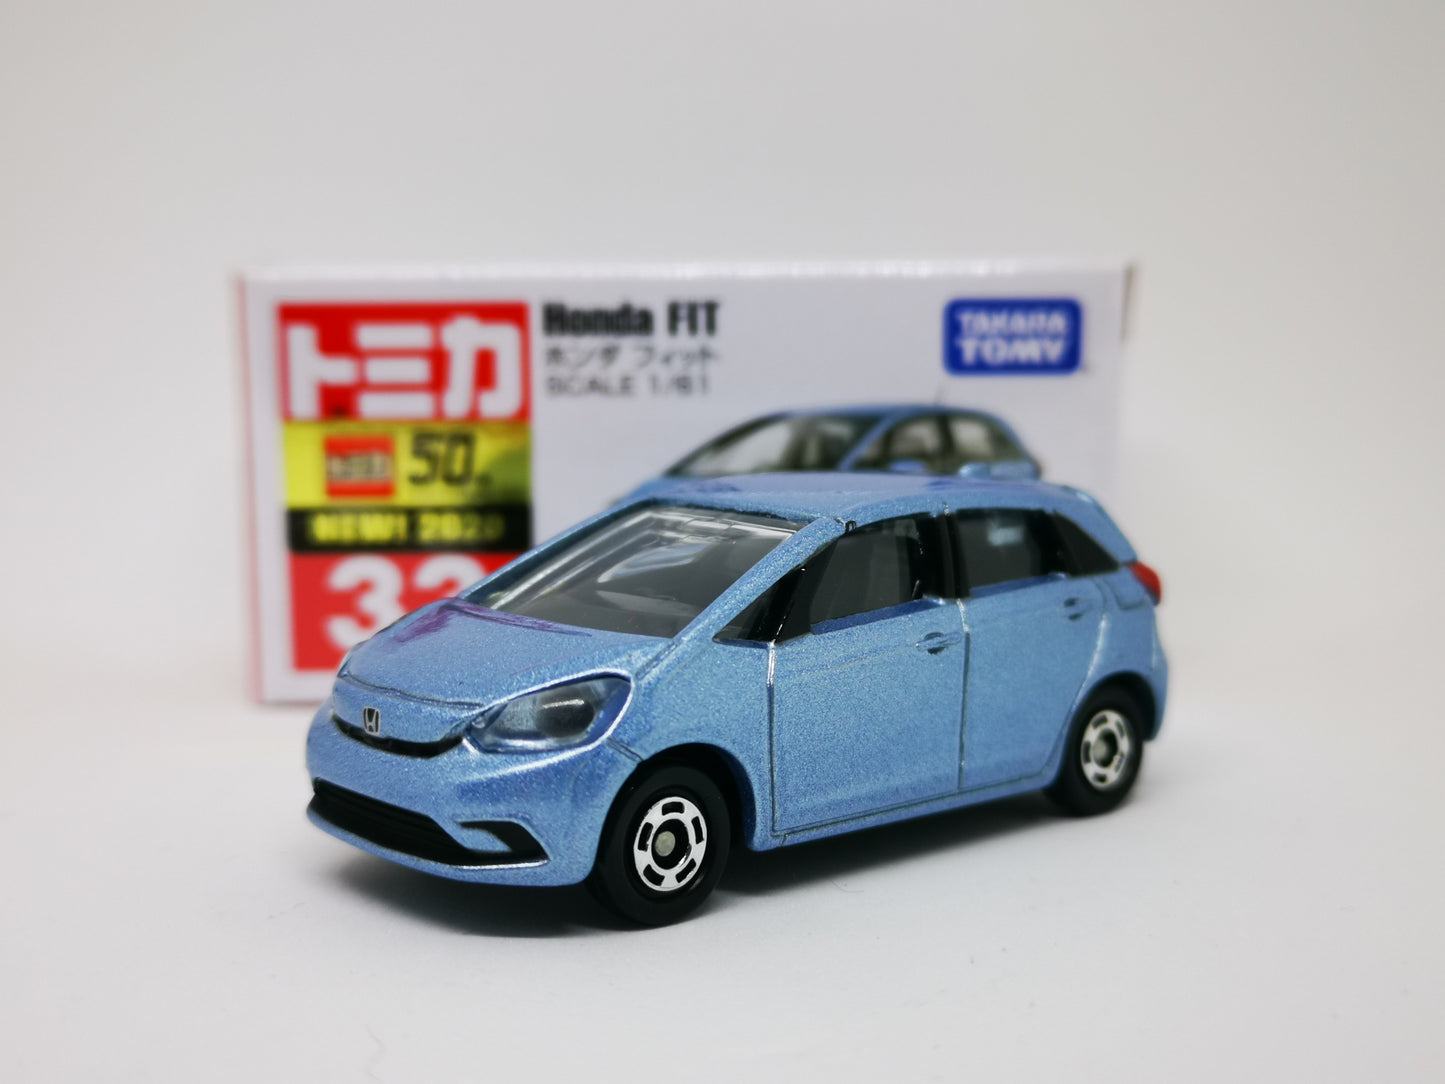 Tomica #33 Honda Fit Jazz 1:64 Scale